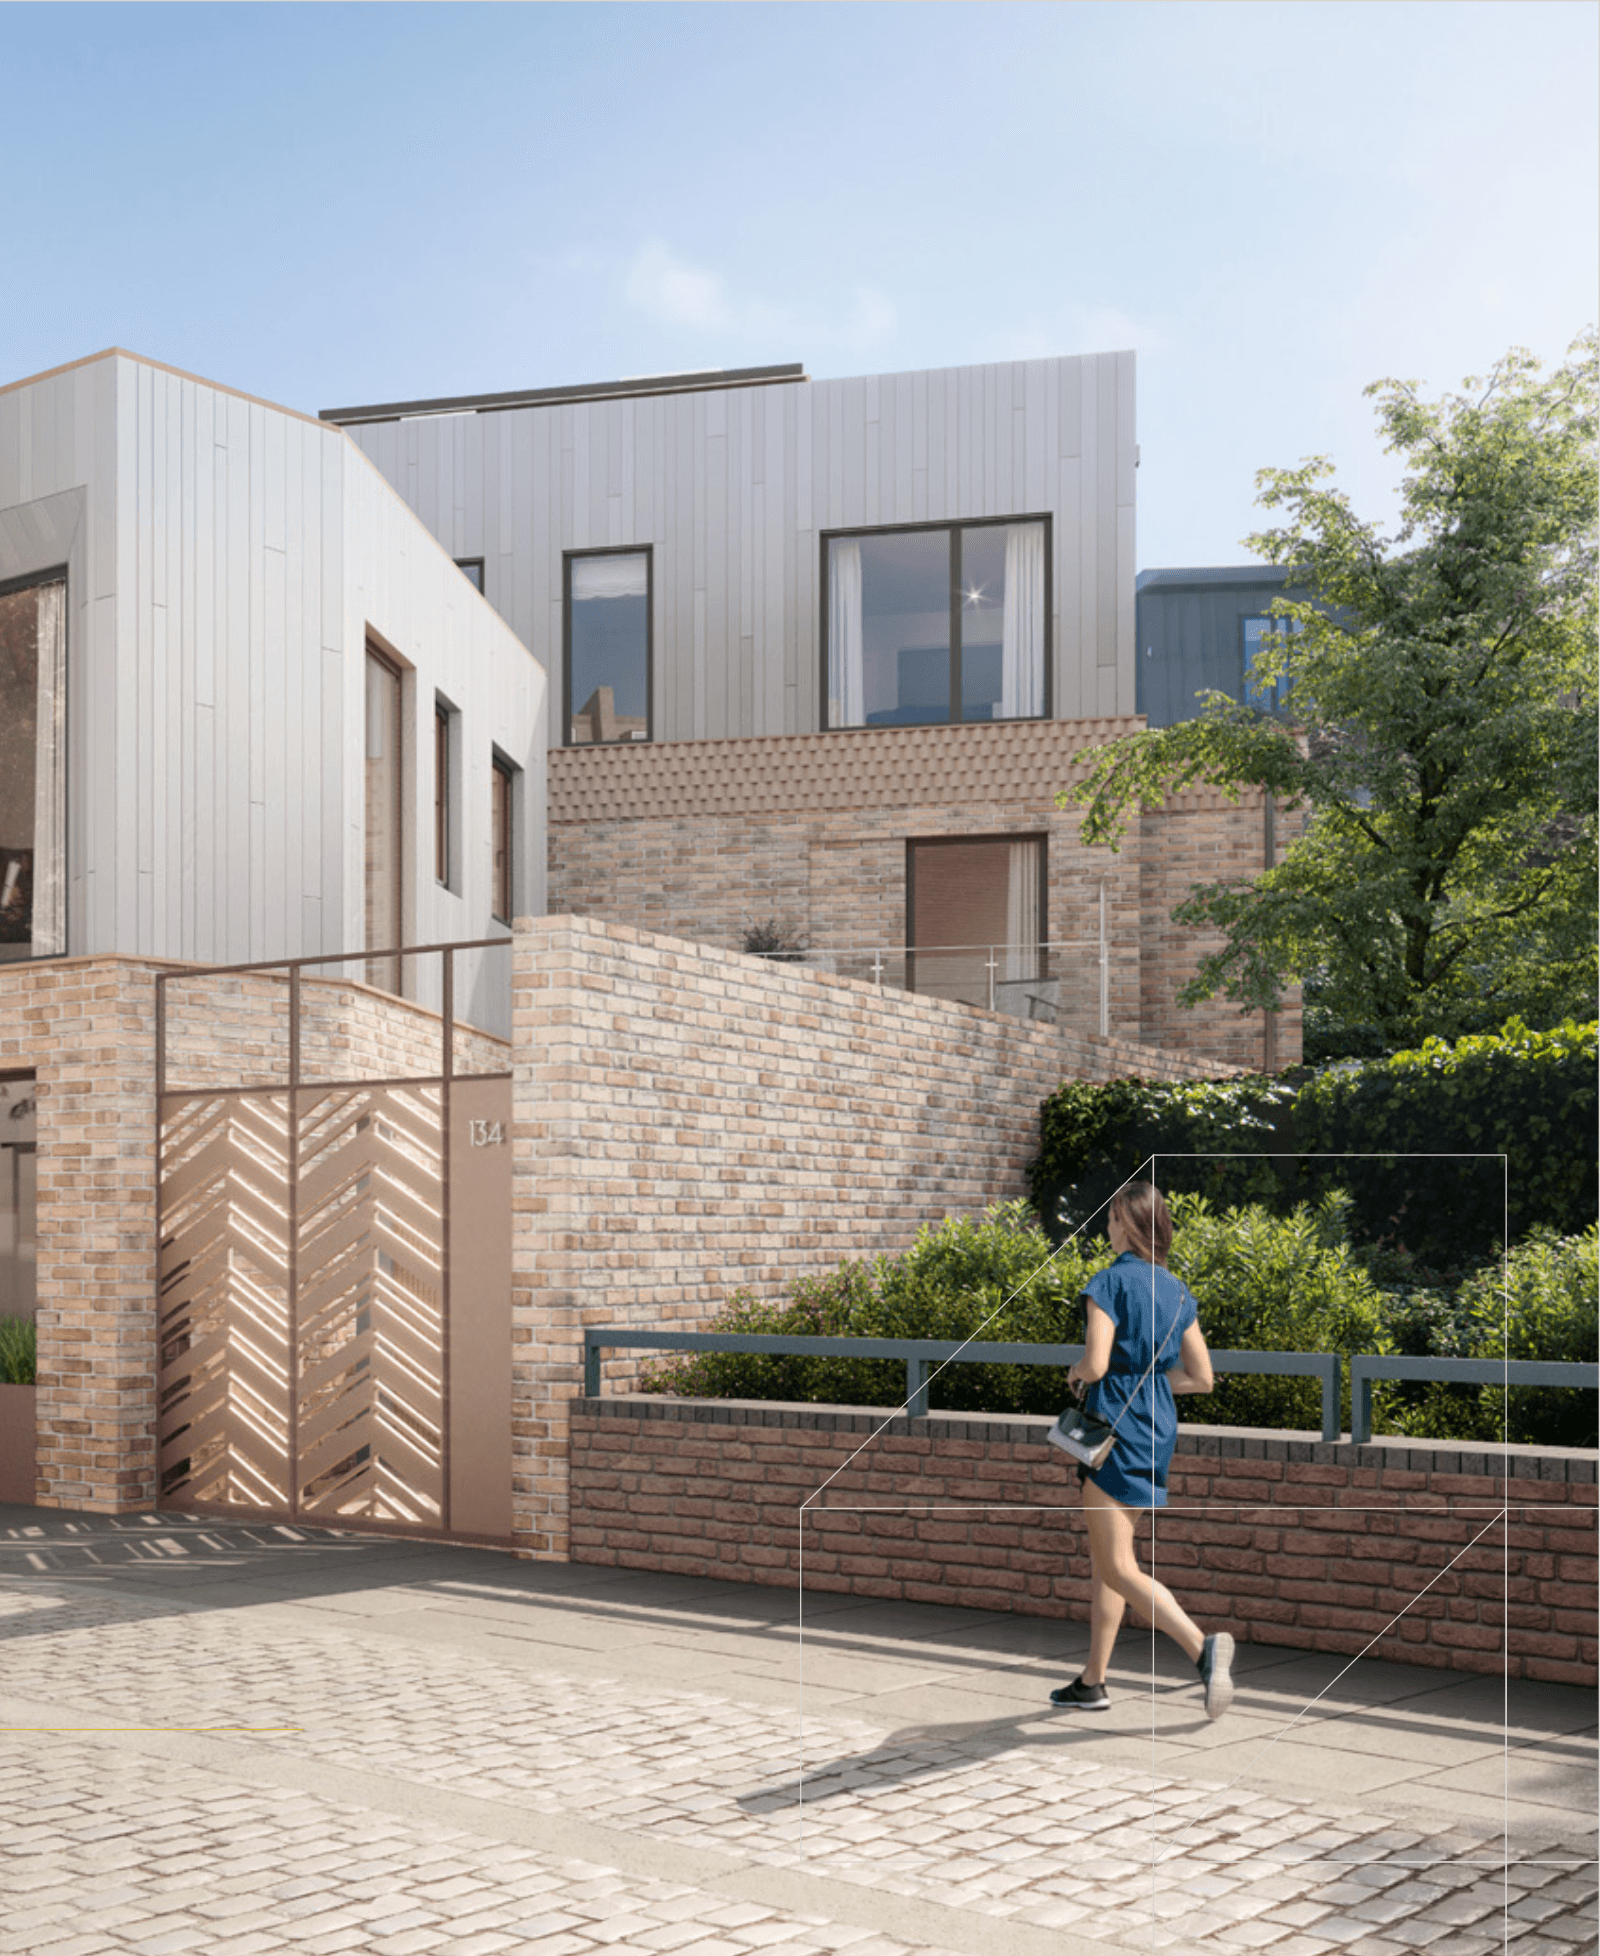 BRAND NEW DEVELOPMENT, INTRODUCING THE MEWS HOUSE, A TWO BEDROOM PROPERTY WITH PRIVATE ROOF TERRACE, IN CENTRAL BATTERSEA, HIGH STREET LOCATION.